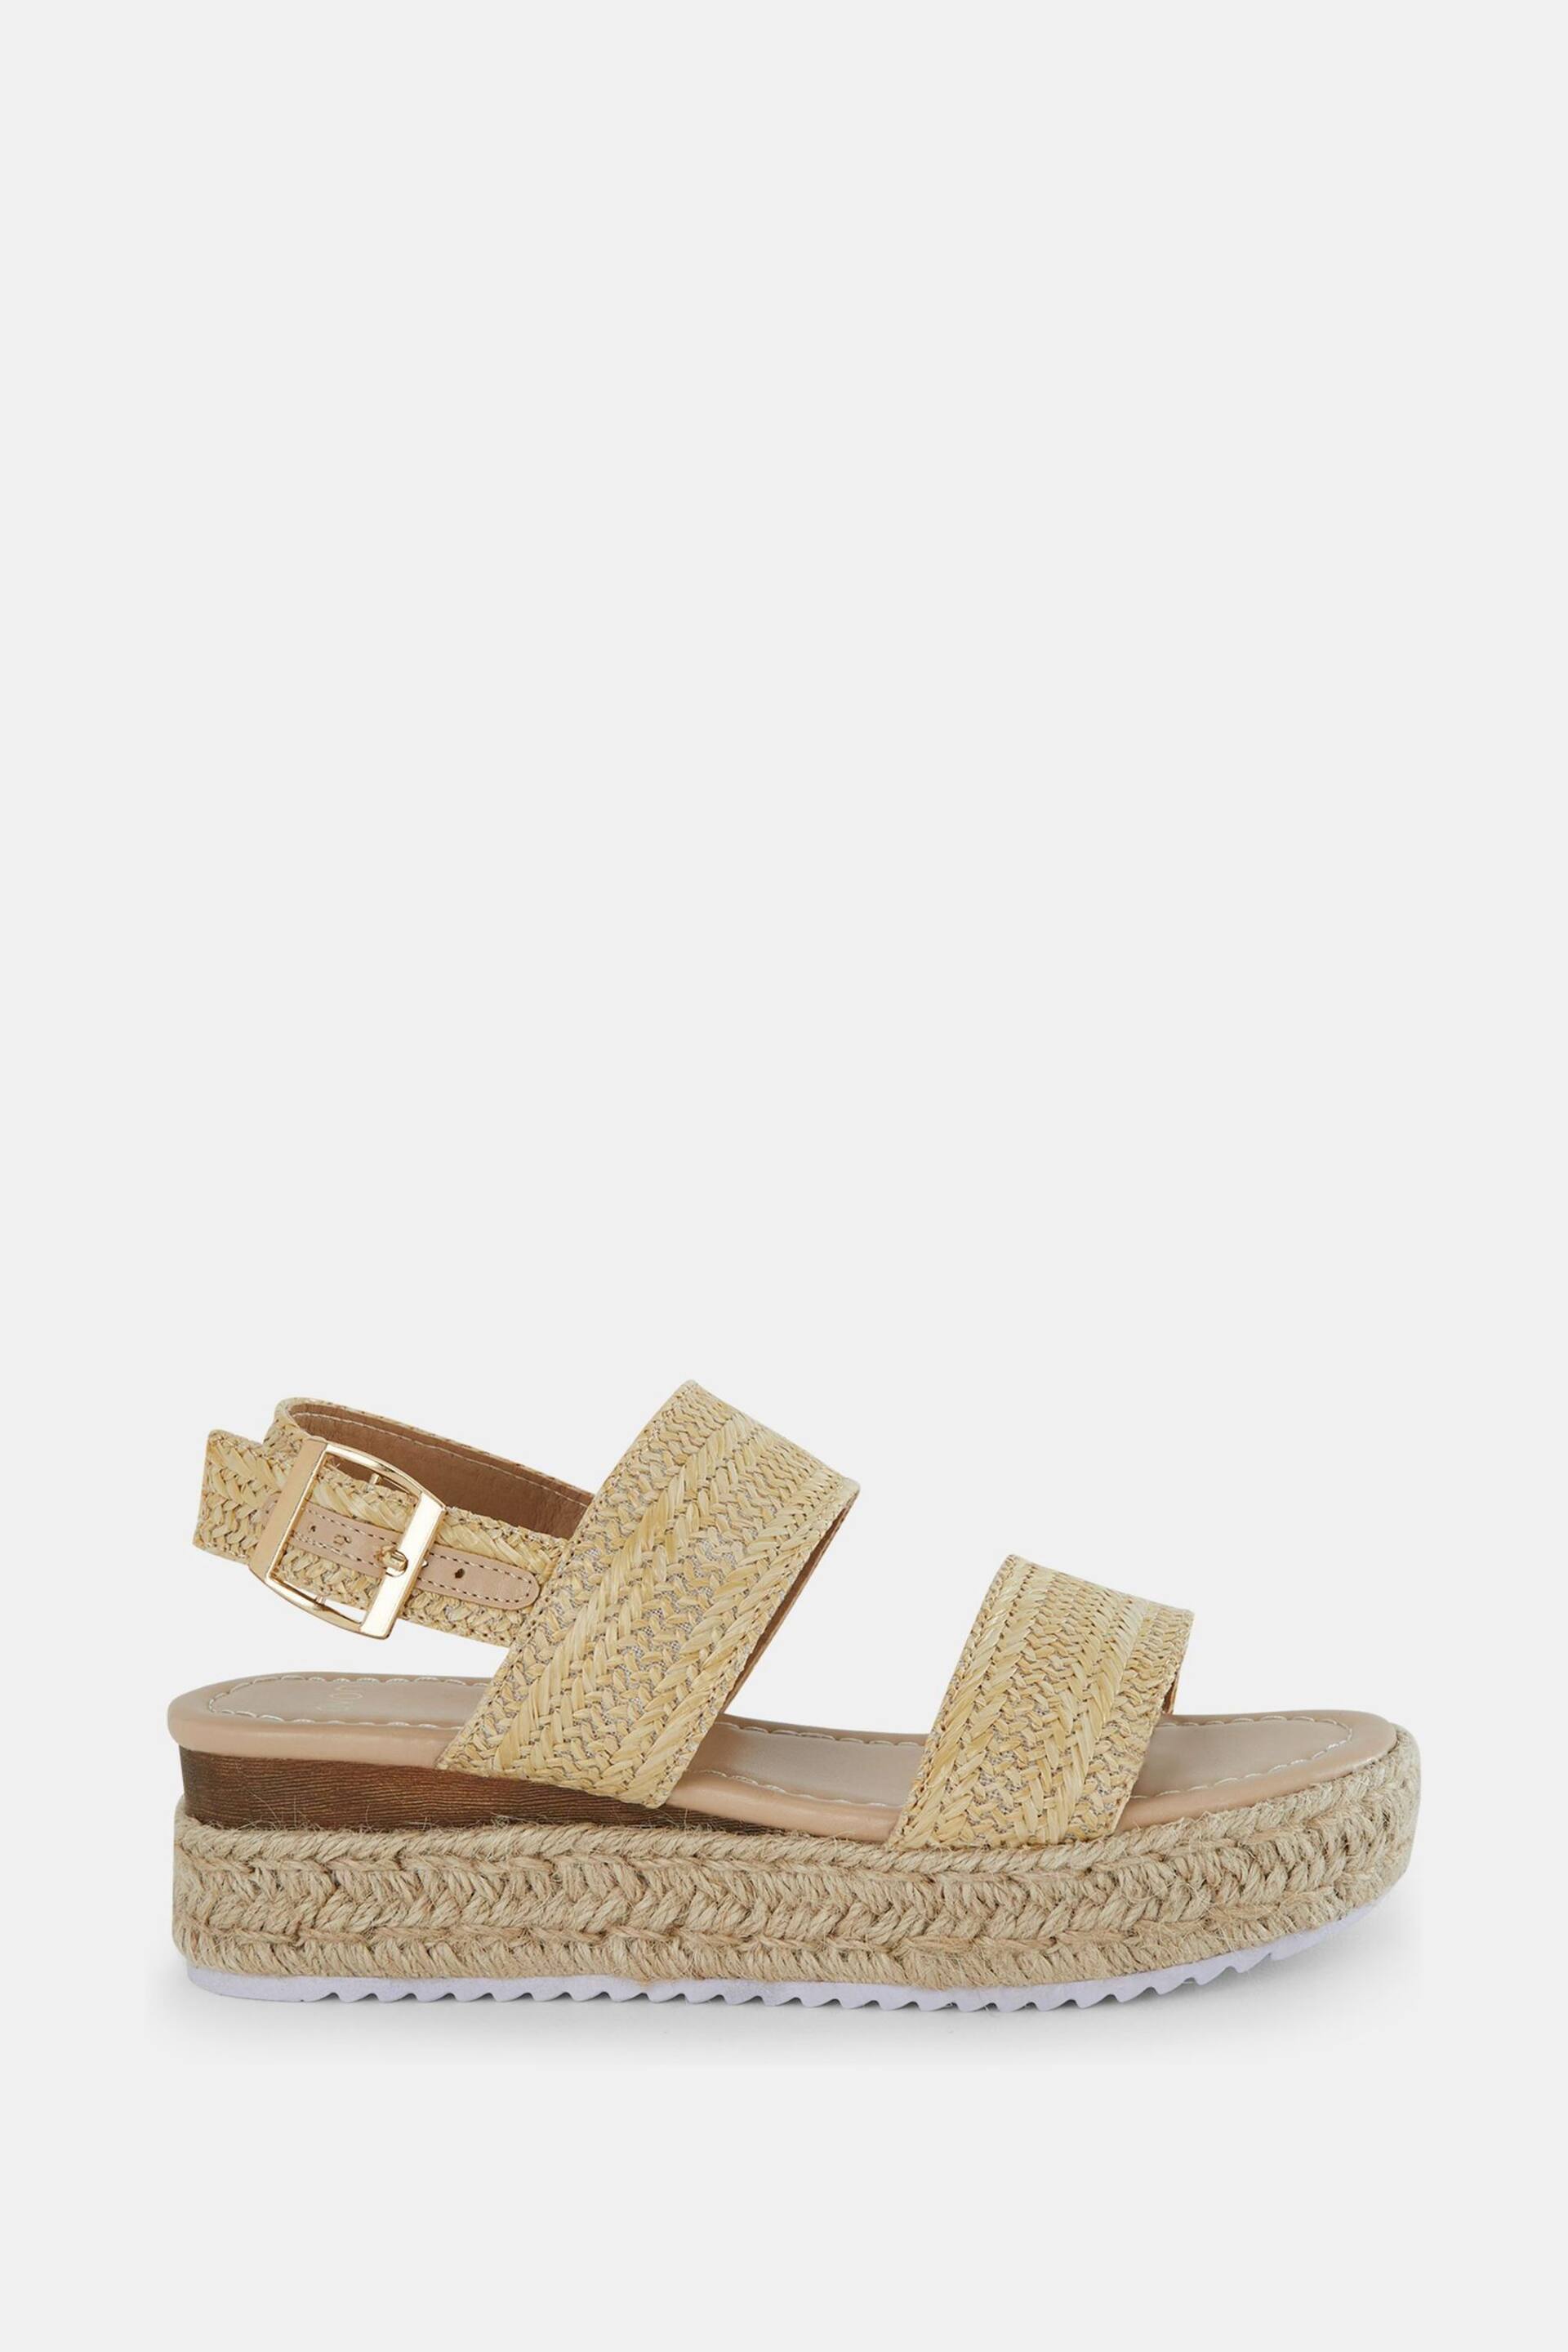 Novo Natural Wide Fit Sadie Espadrille Double Strap Sandals - Image 2 of 6